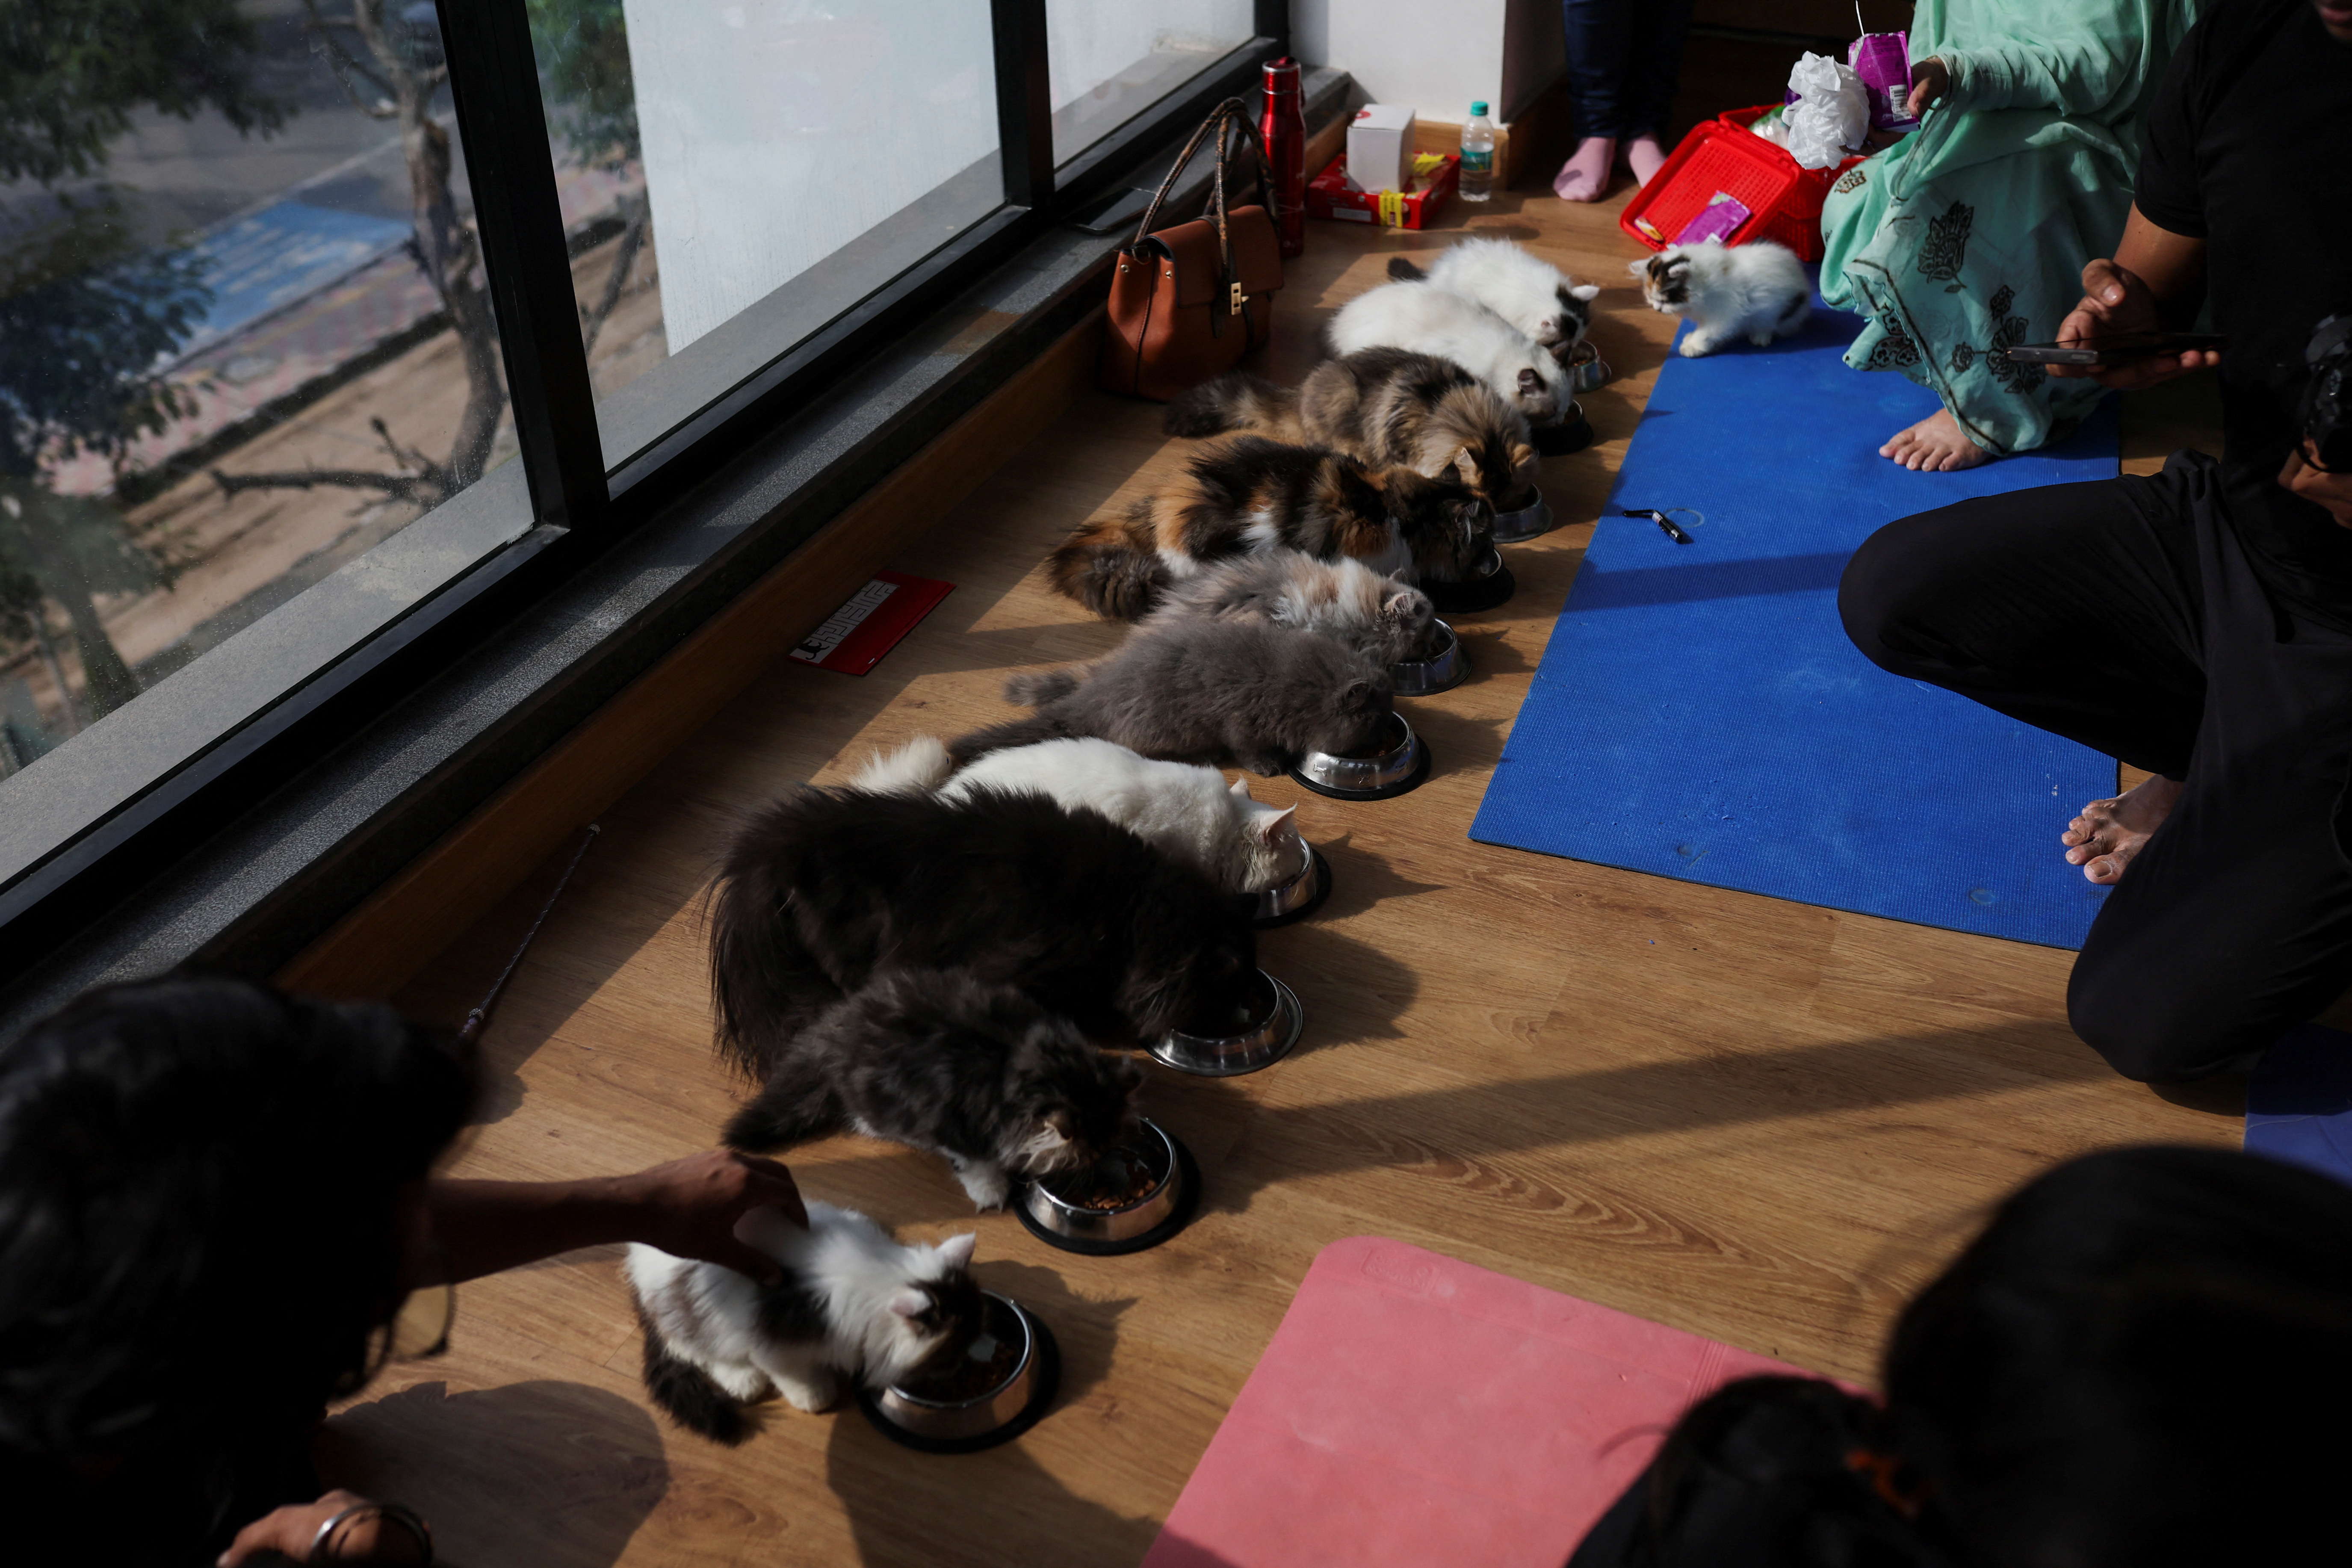 Yoga enthusiasts master the cat pose at kitten yoga session